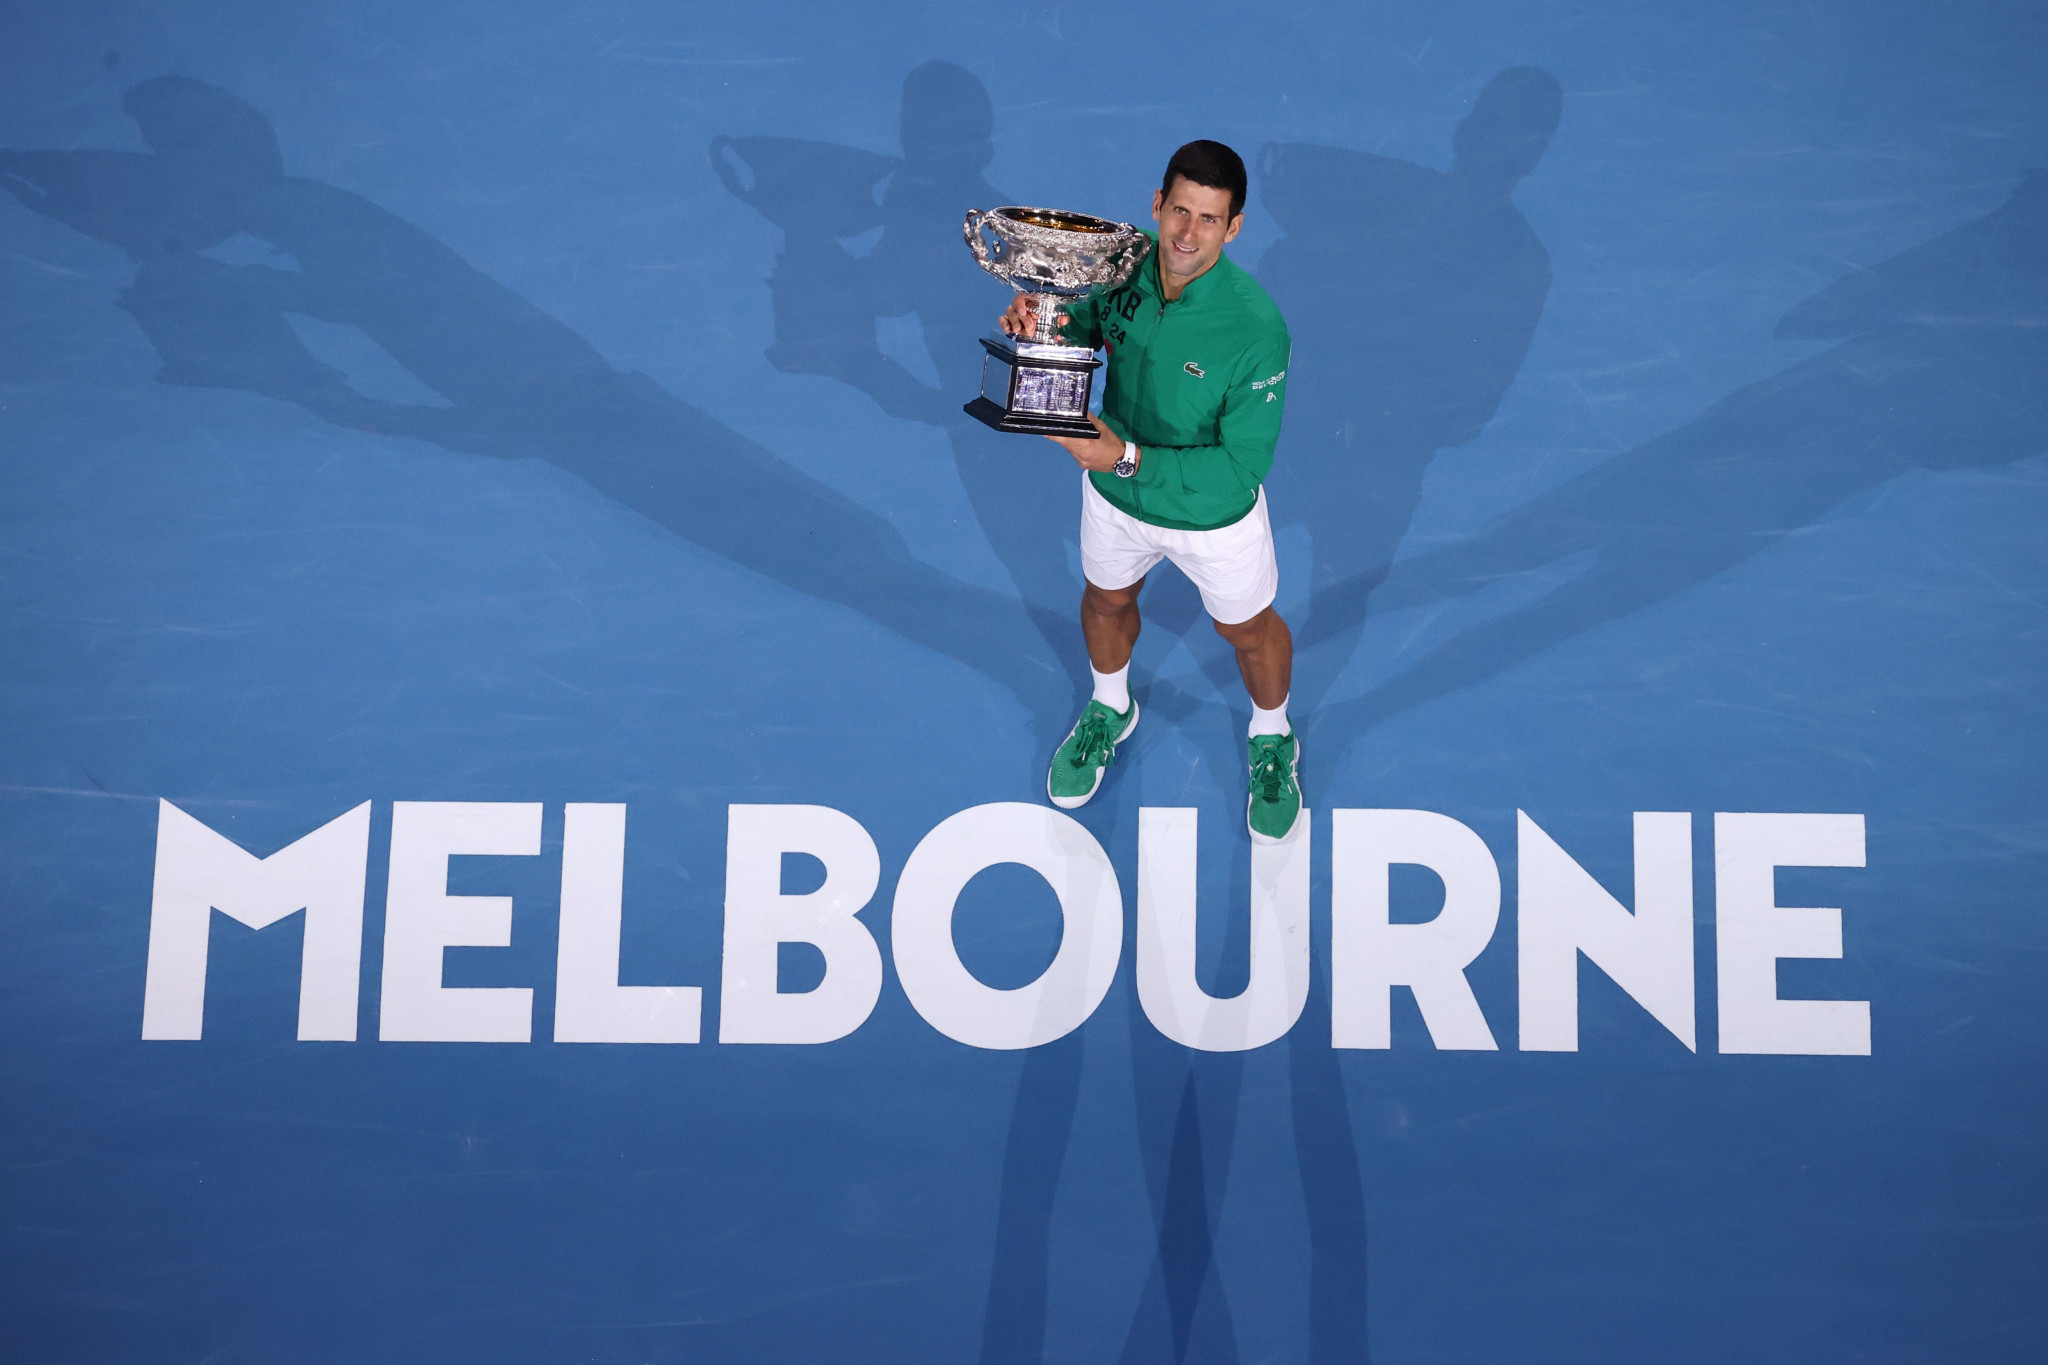 Three tournaments are set to take place in Melbourne before the city hosts the Australian Open in February ©Getty Images